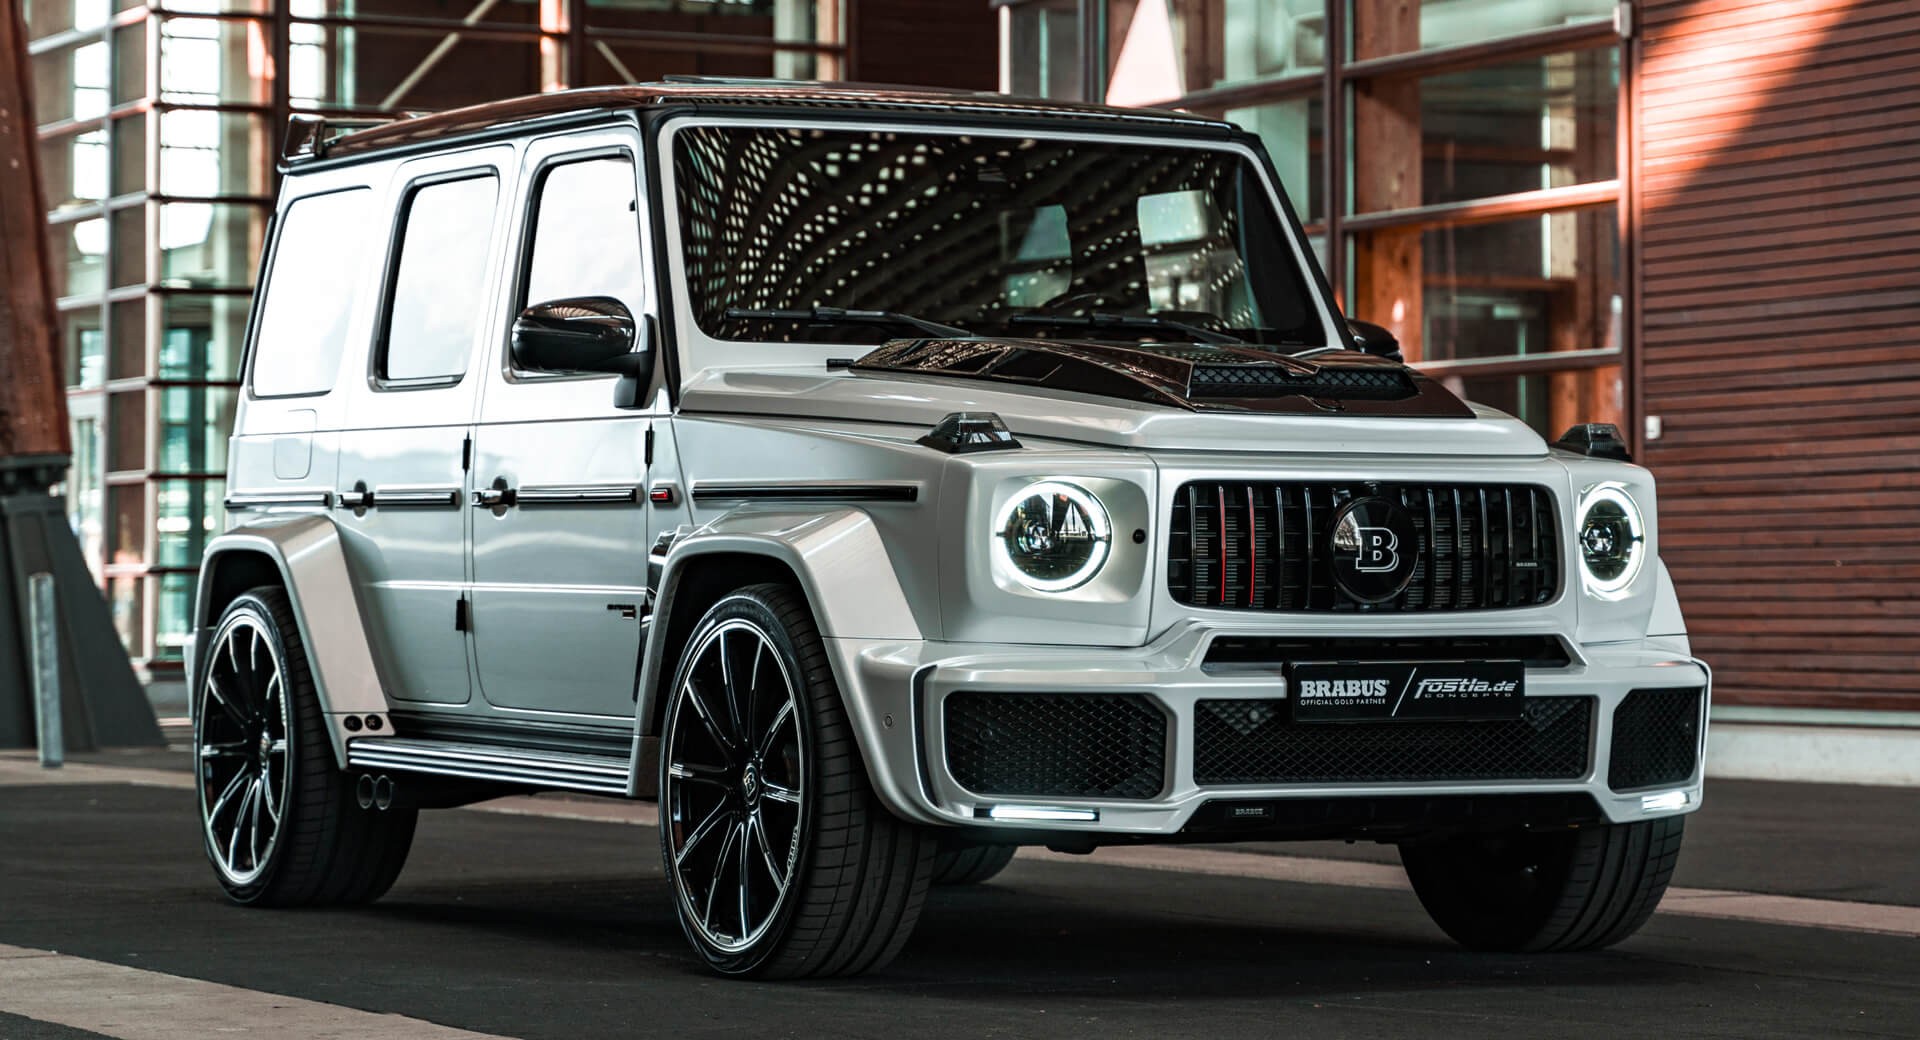 Fostla Puts Its Own Custom Touches On Brabus G63 Amg 700 Widestar Carscoops